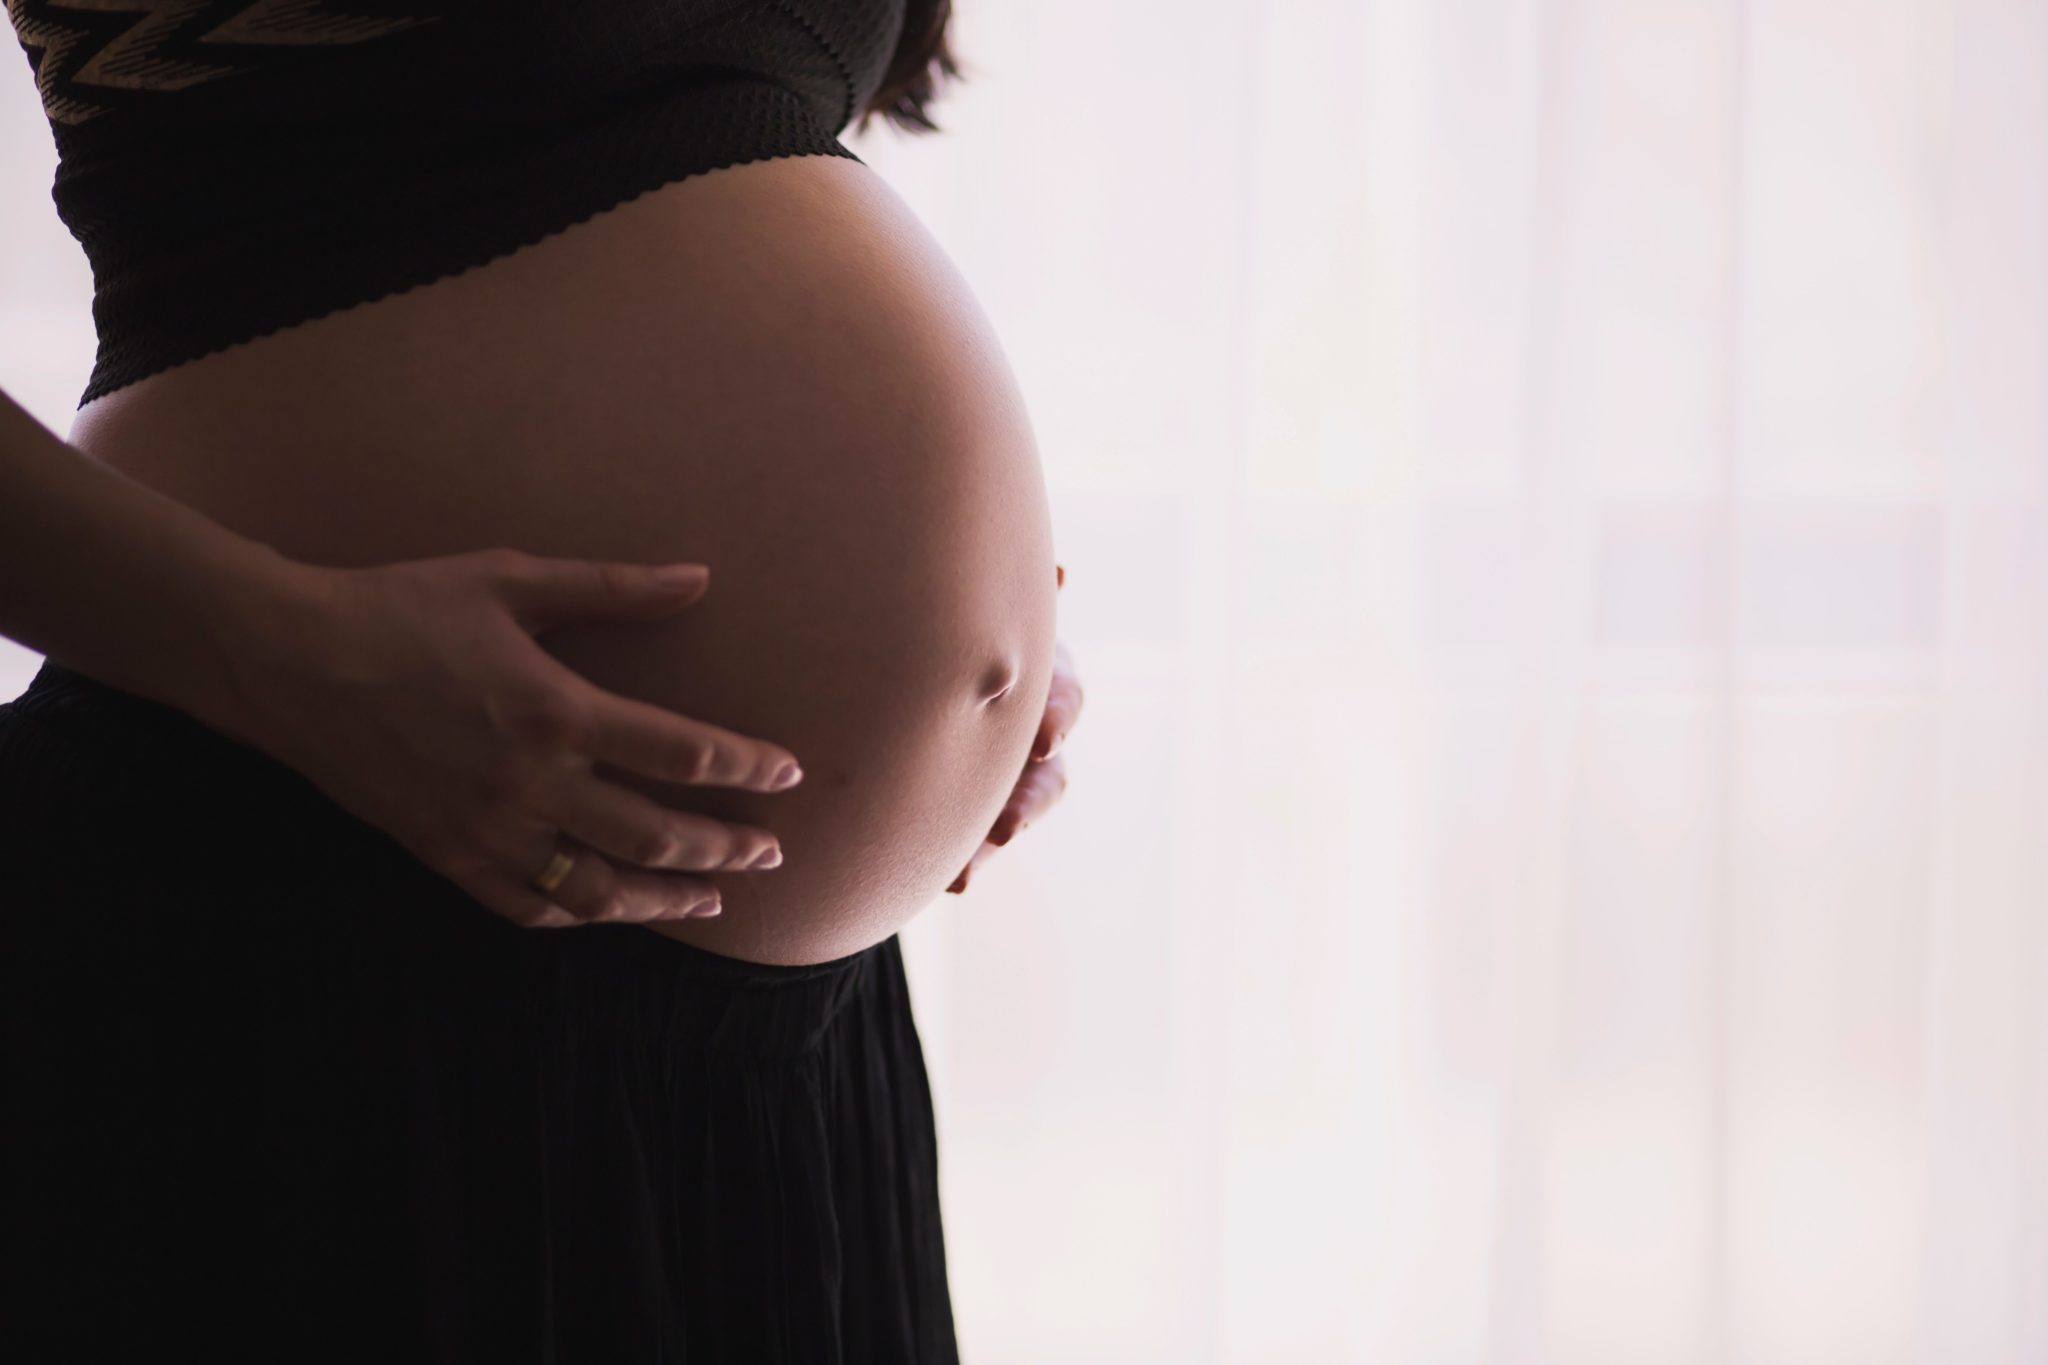 image of woman with visible pregnant stomach holding her stomach standing sideways